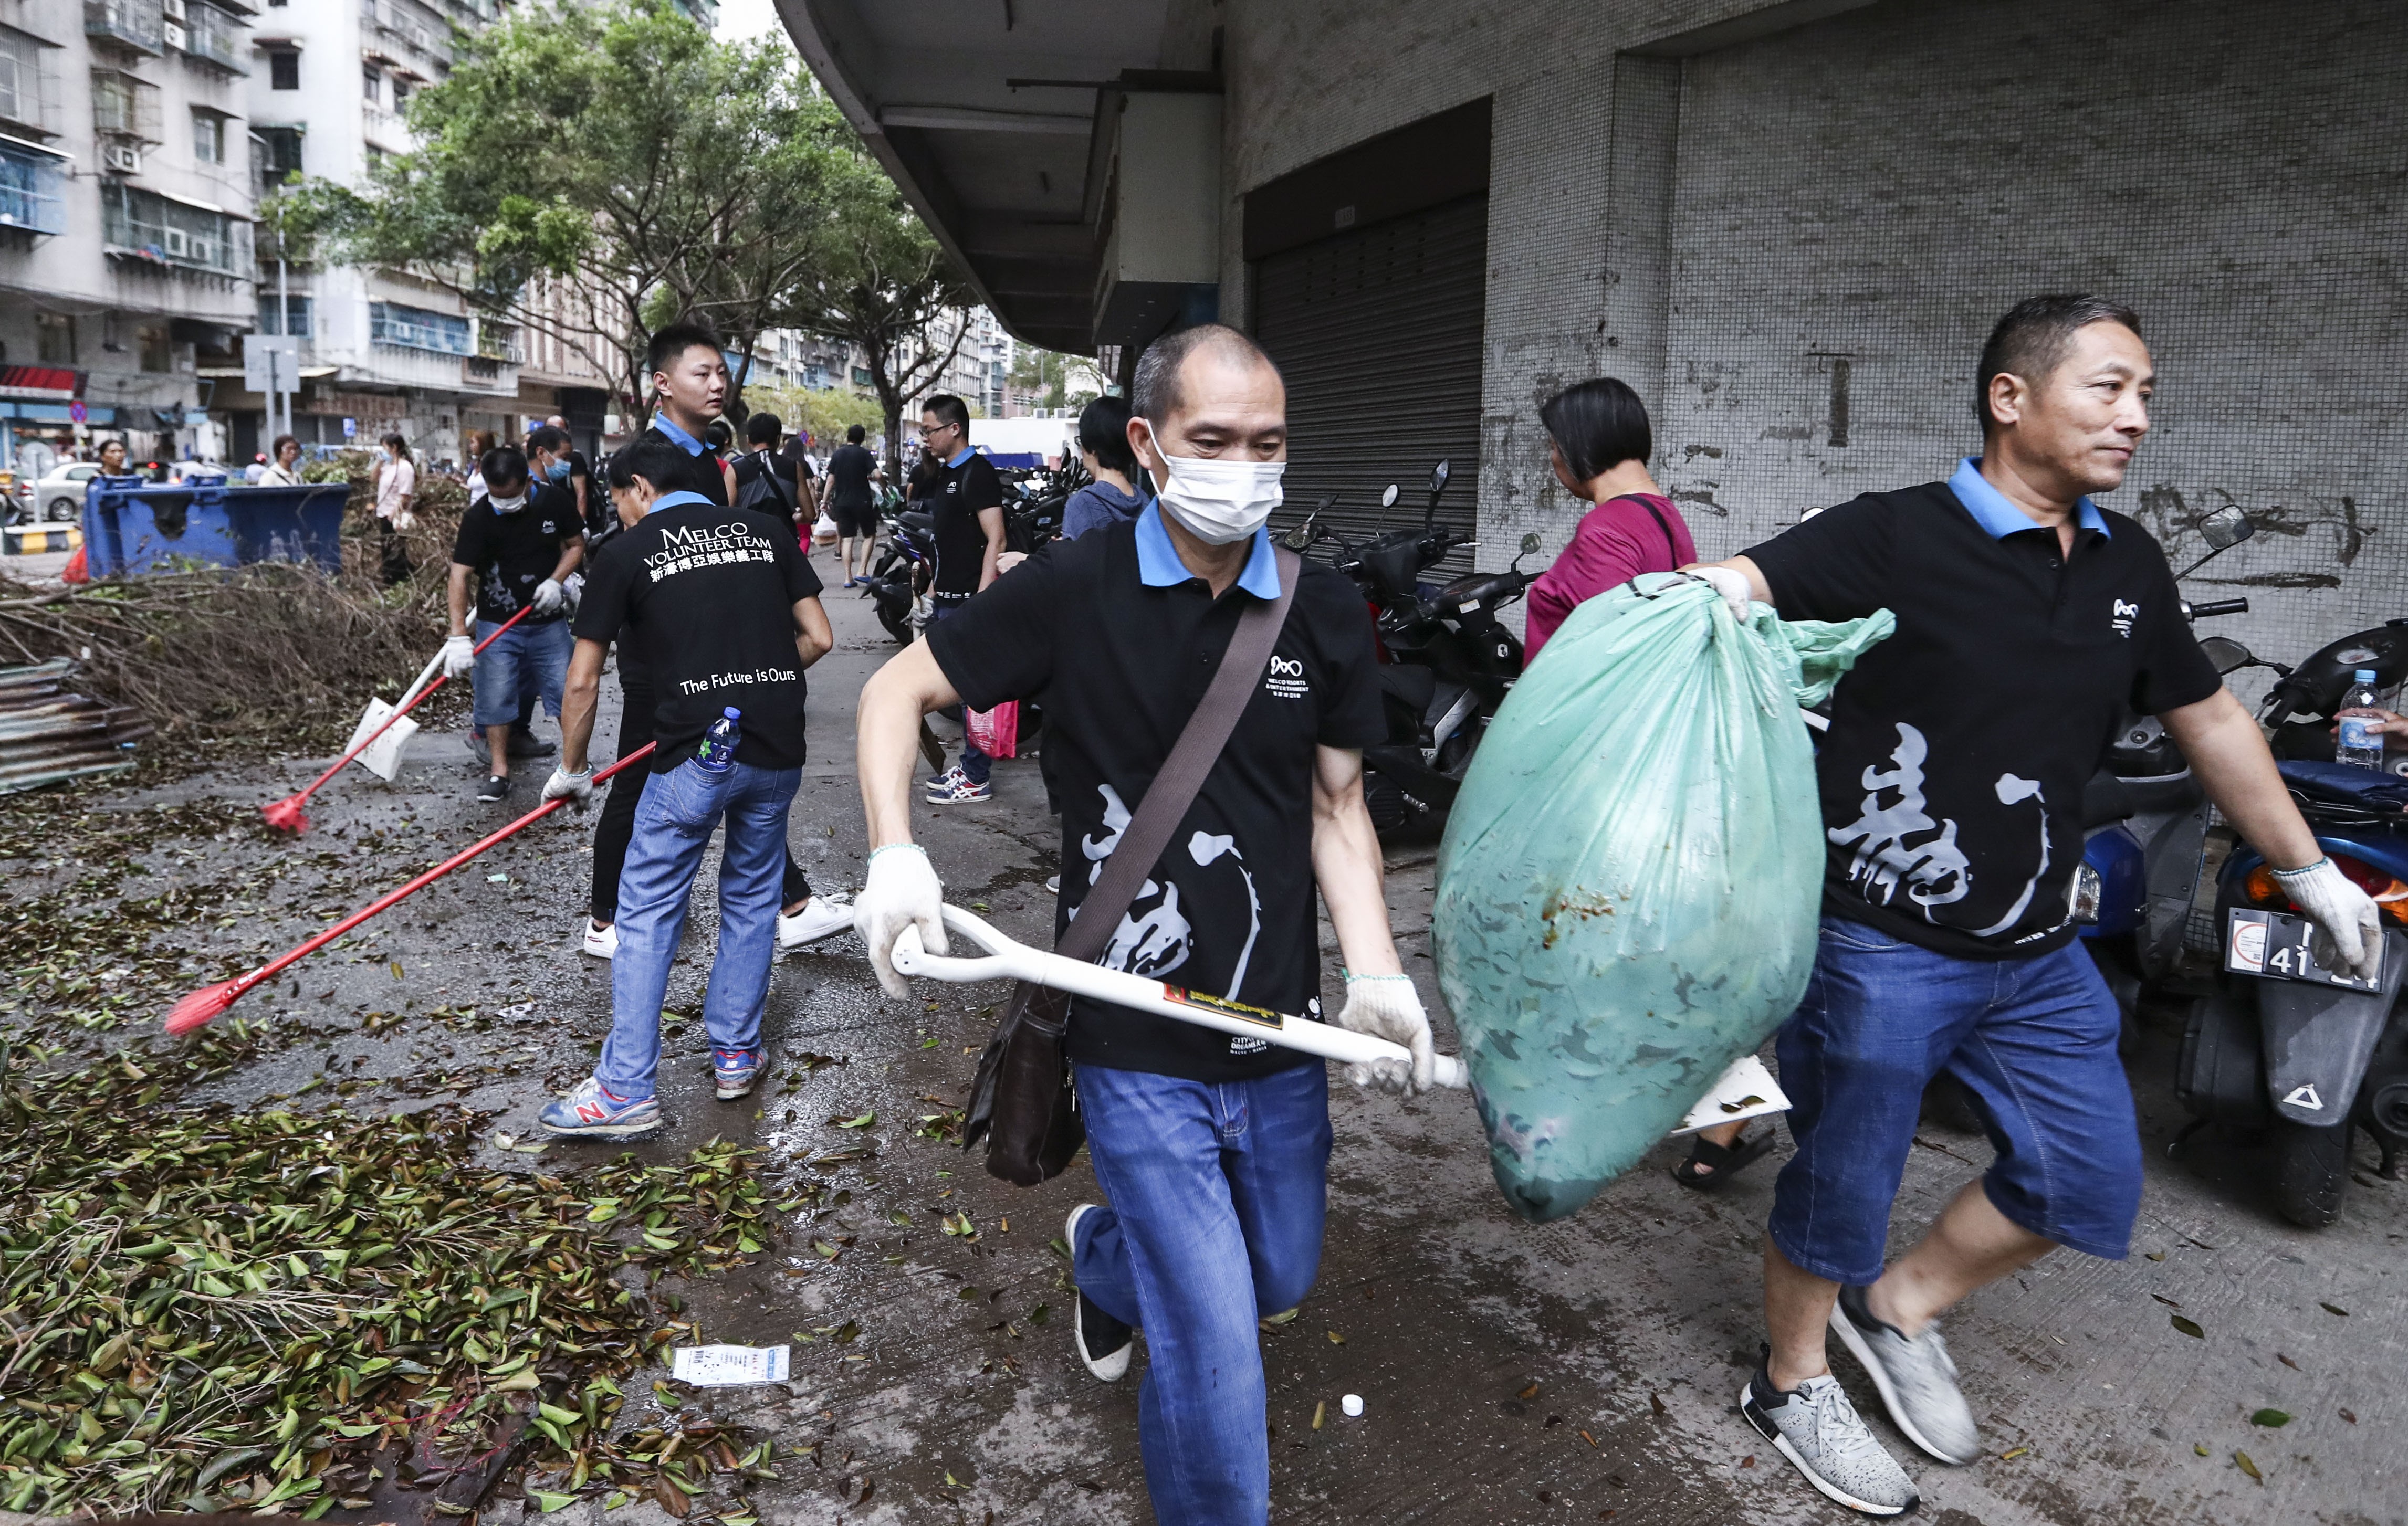 Macau residents clear the streets, covered with piles of rubbish and debris, after the city was hit by two storms in the past week. Photo: Nora Tam